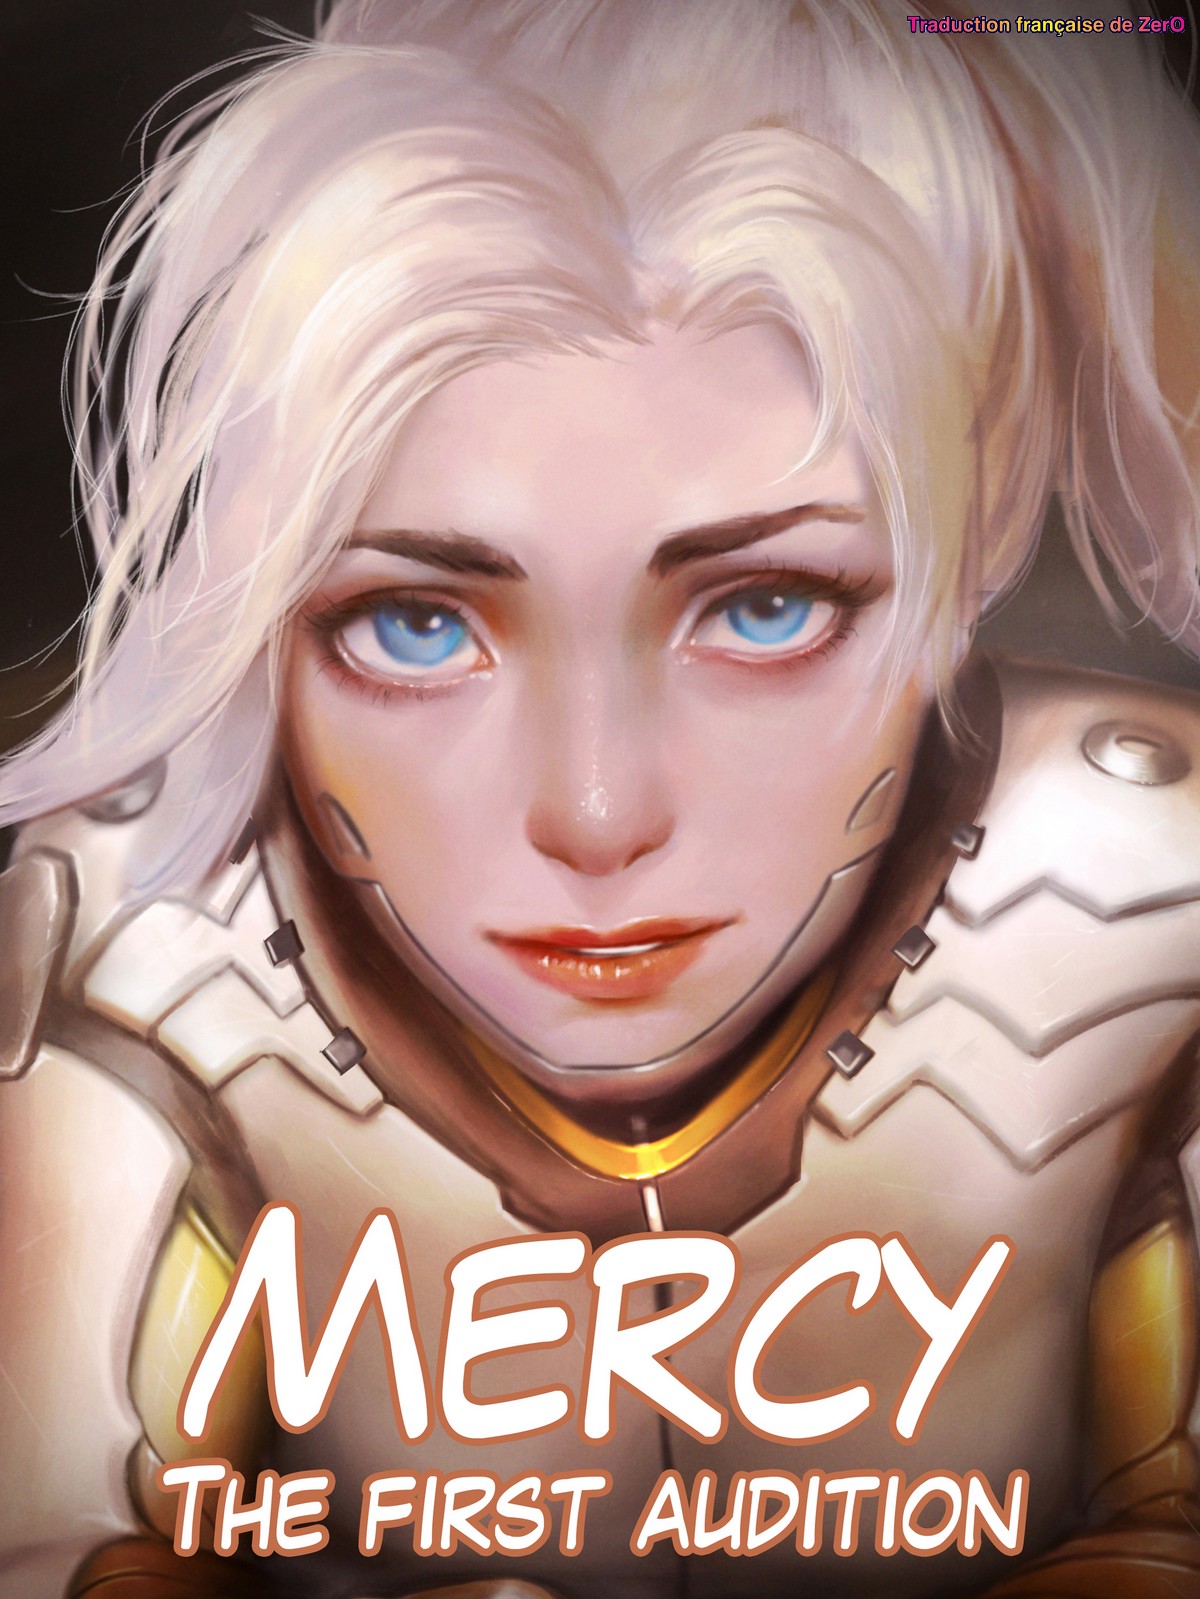 [Firolian] Mercy - The first audition [French] Hentai Comics